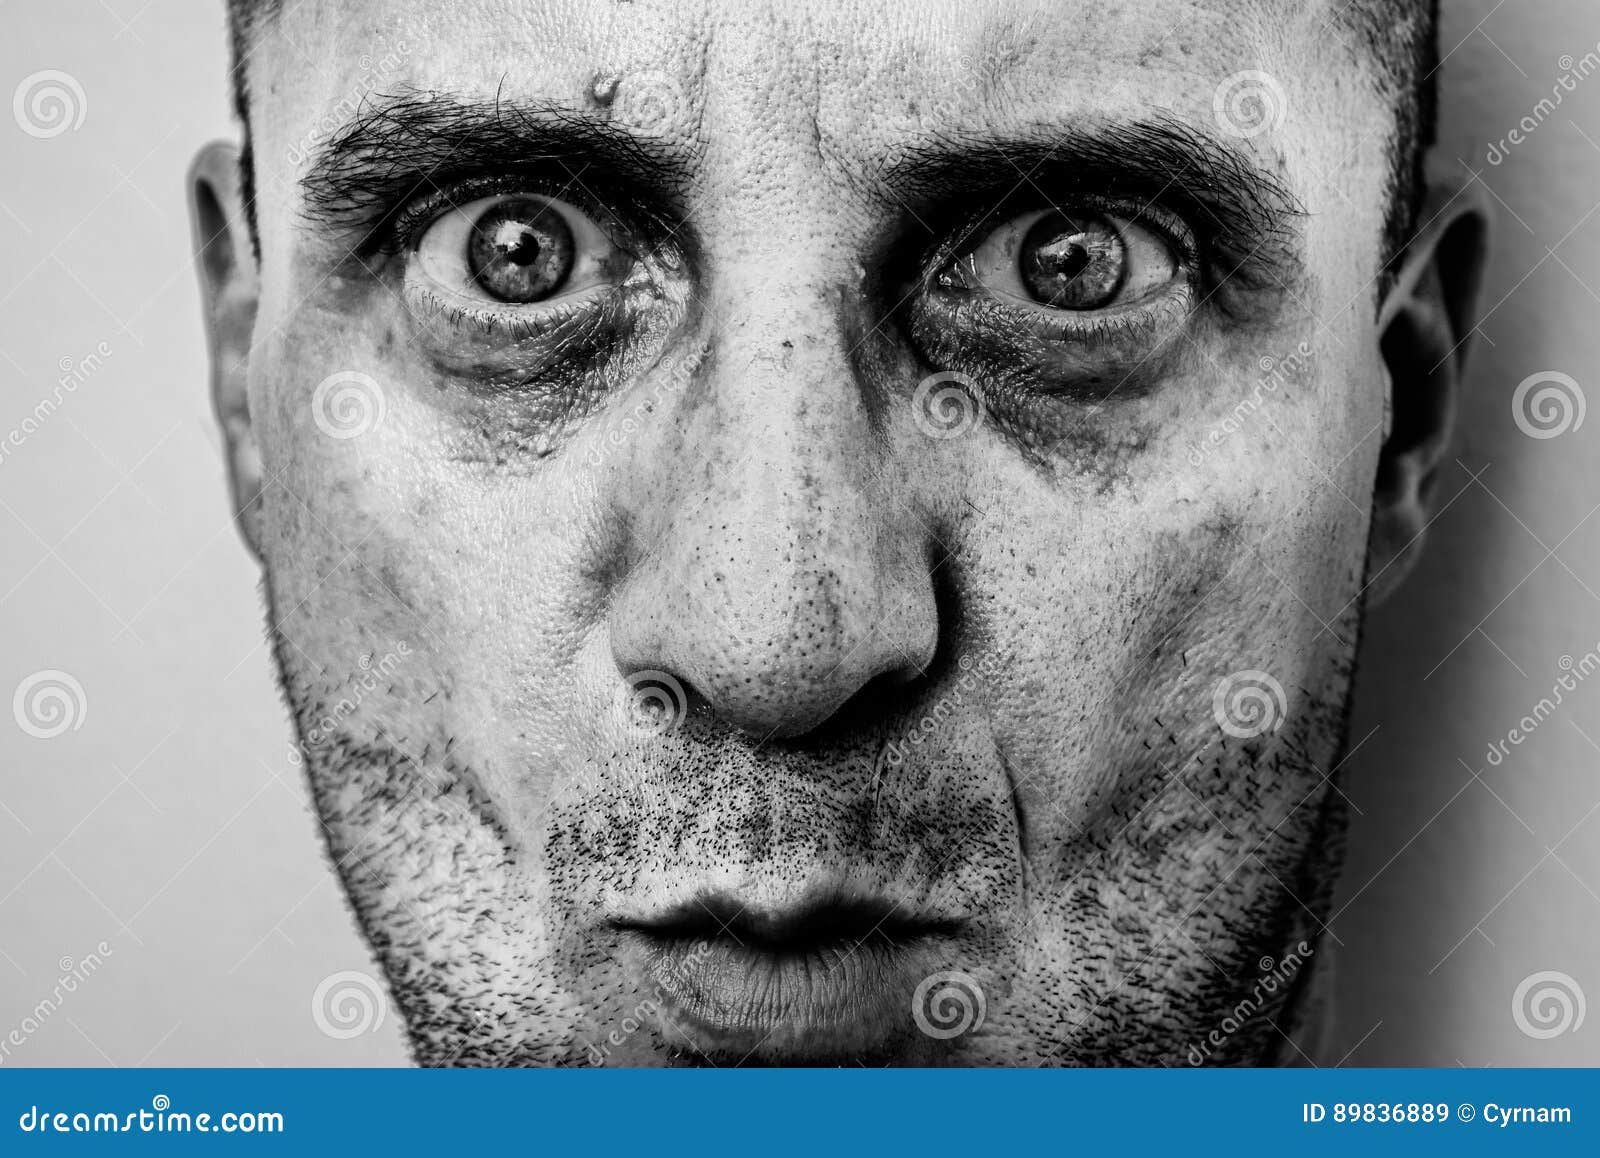 Ugly Man Portrait with Unshaven Face, Dirty Skin, Big Nose with Black ...